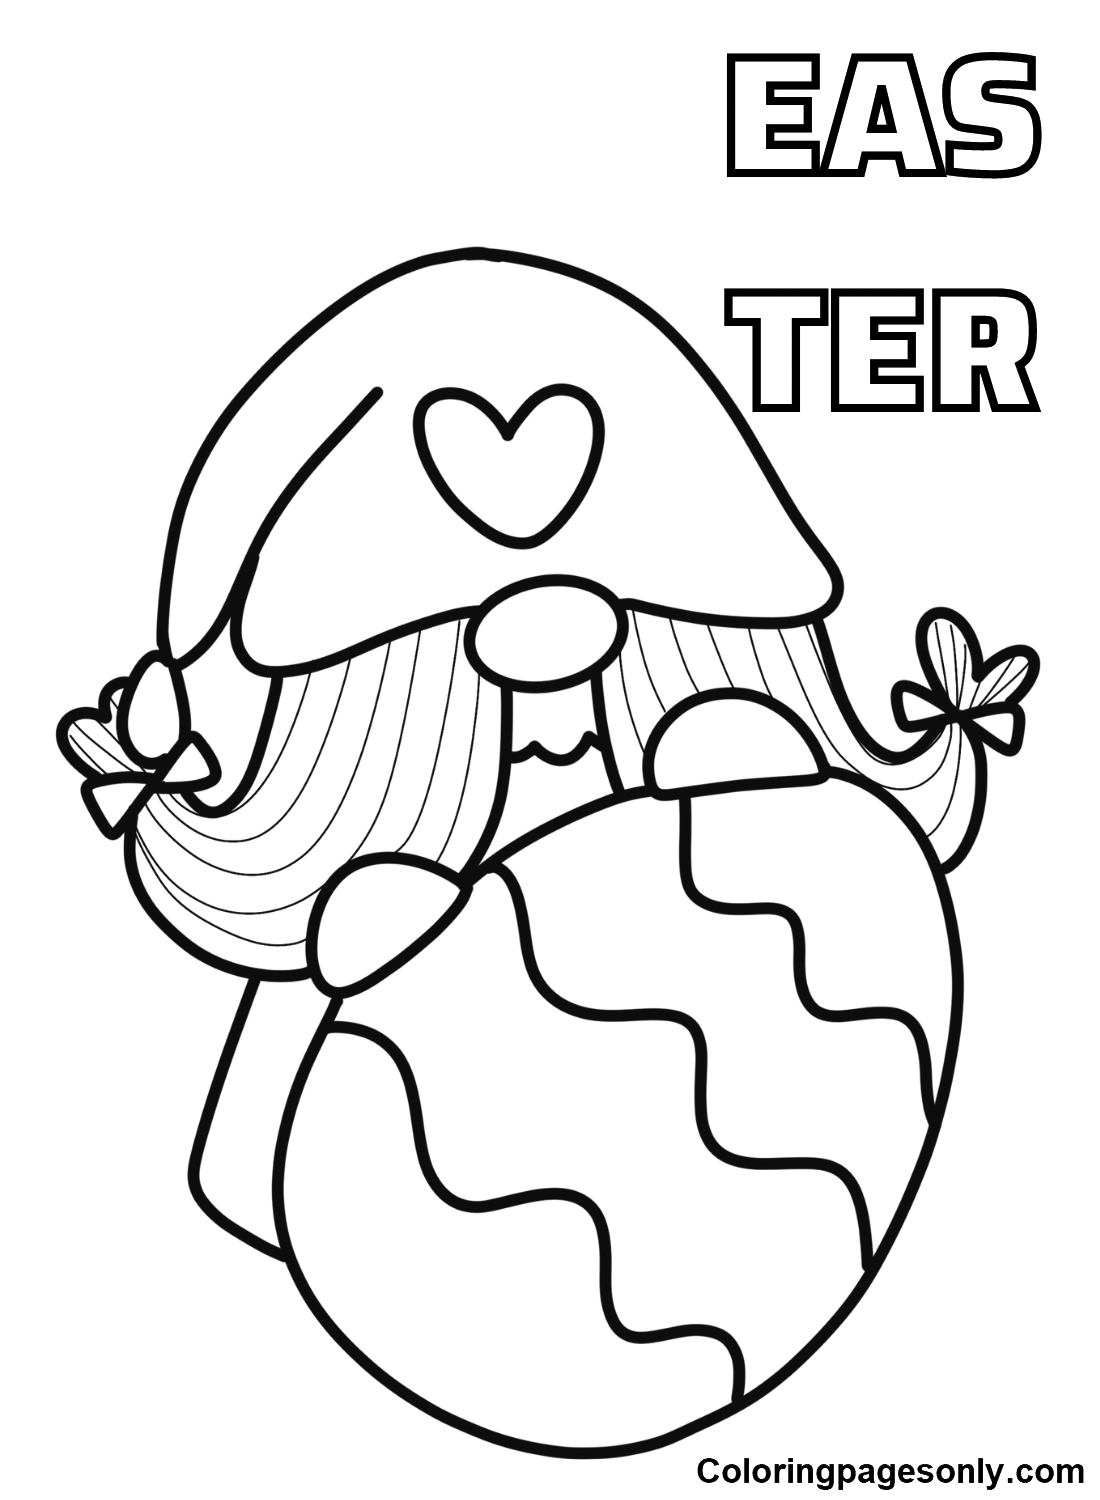 Gnome Easter and Easter Egg Coloring Page